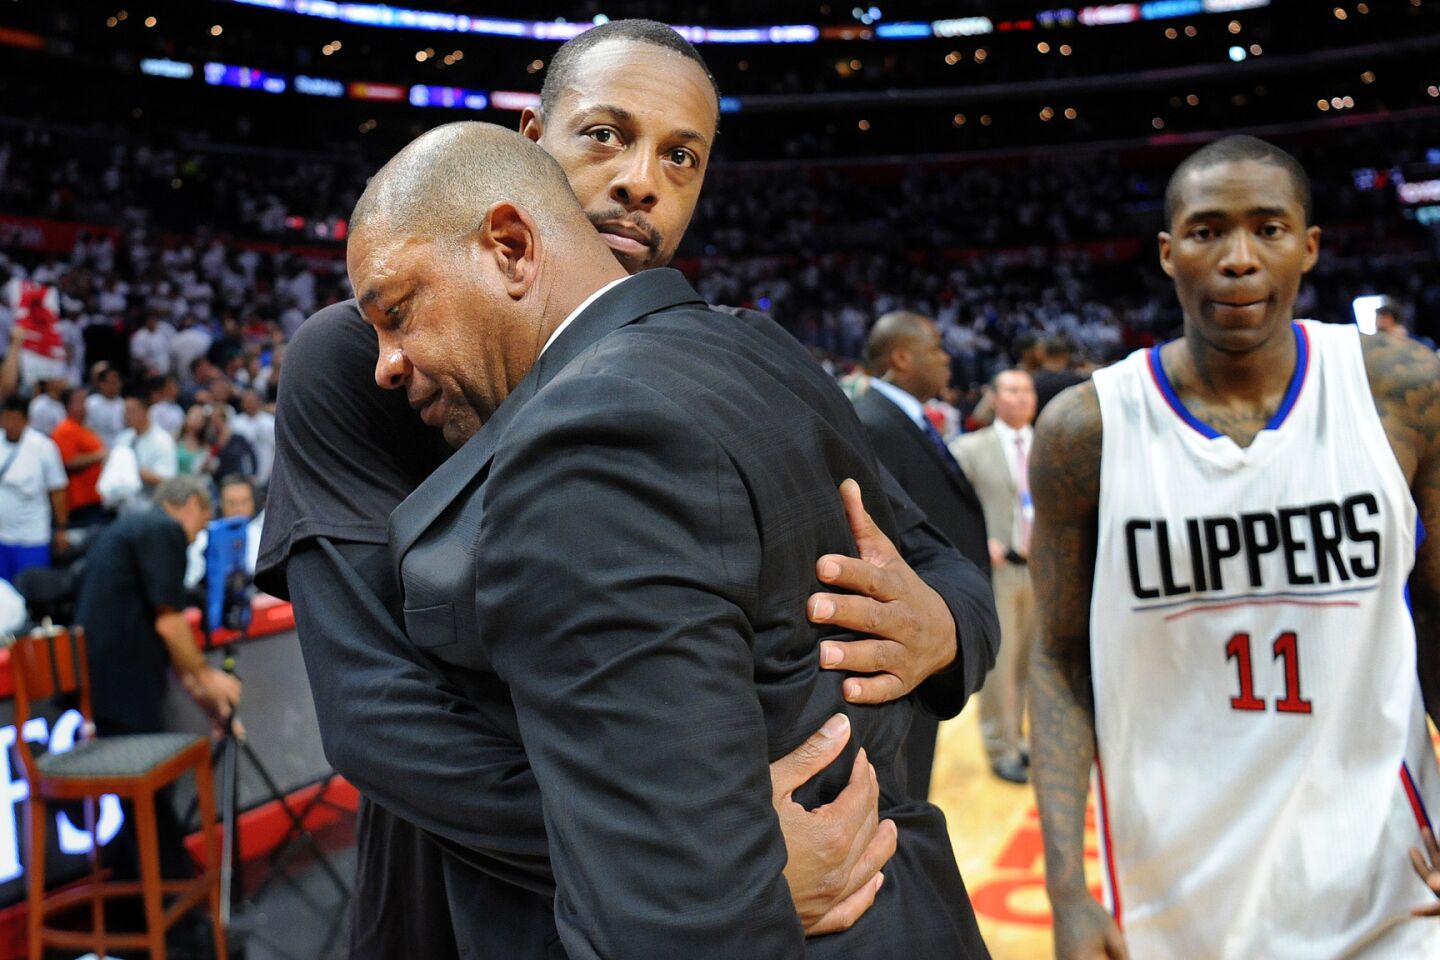 Clippers forward Paul Pierce hugs head coach Doc Rivers as Jamal Crawford walks off the court after losing to the Jazz in Game 7.